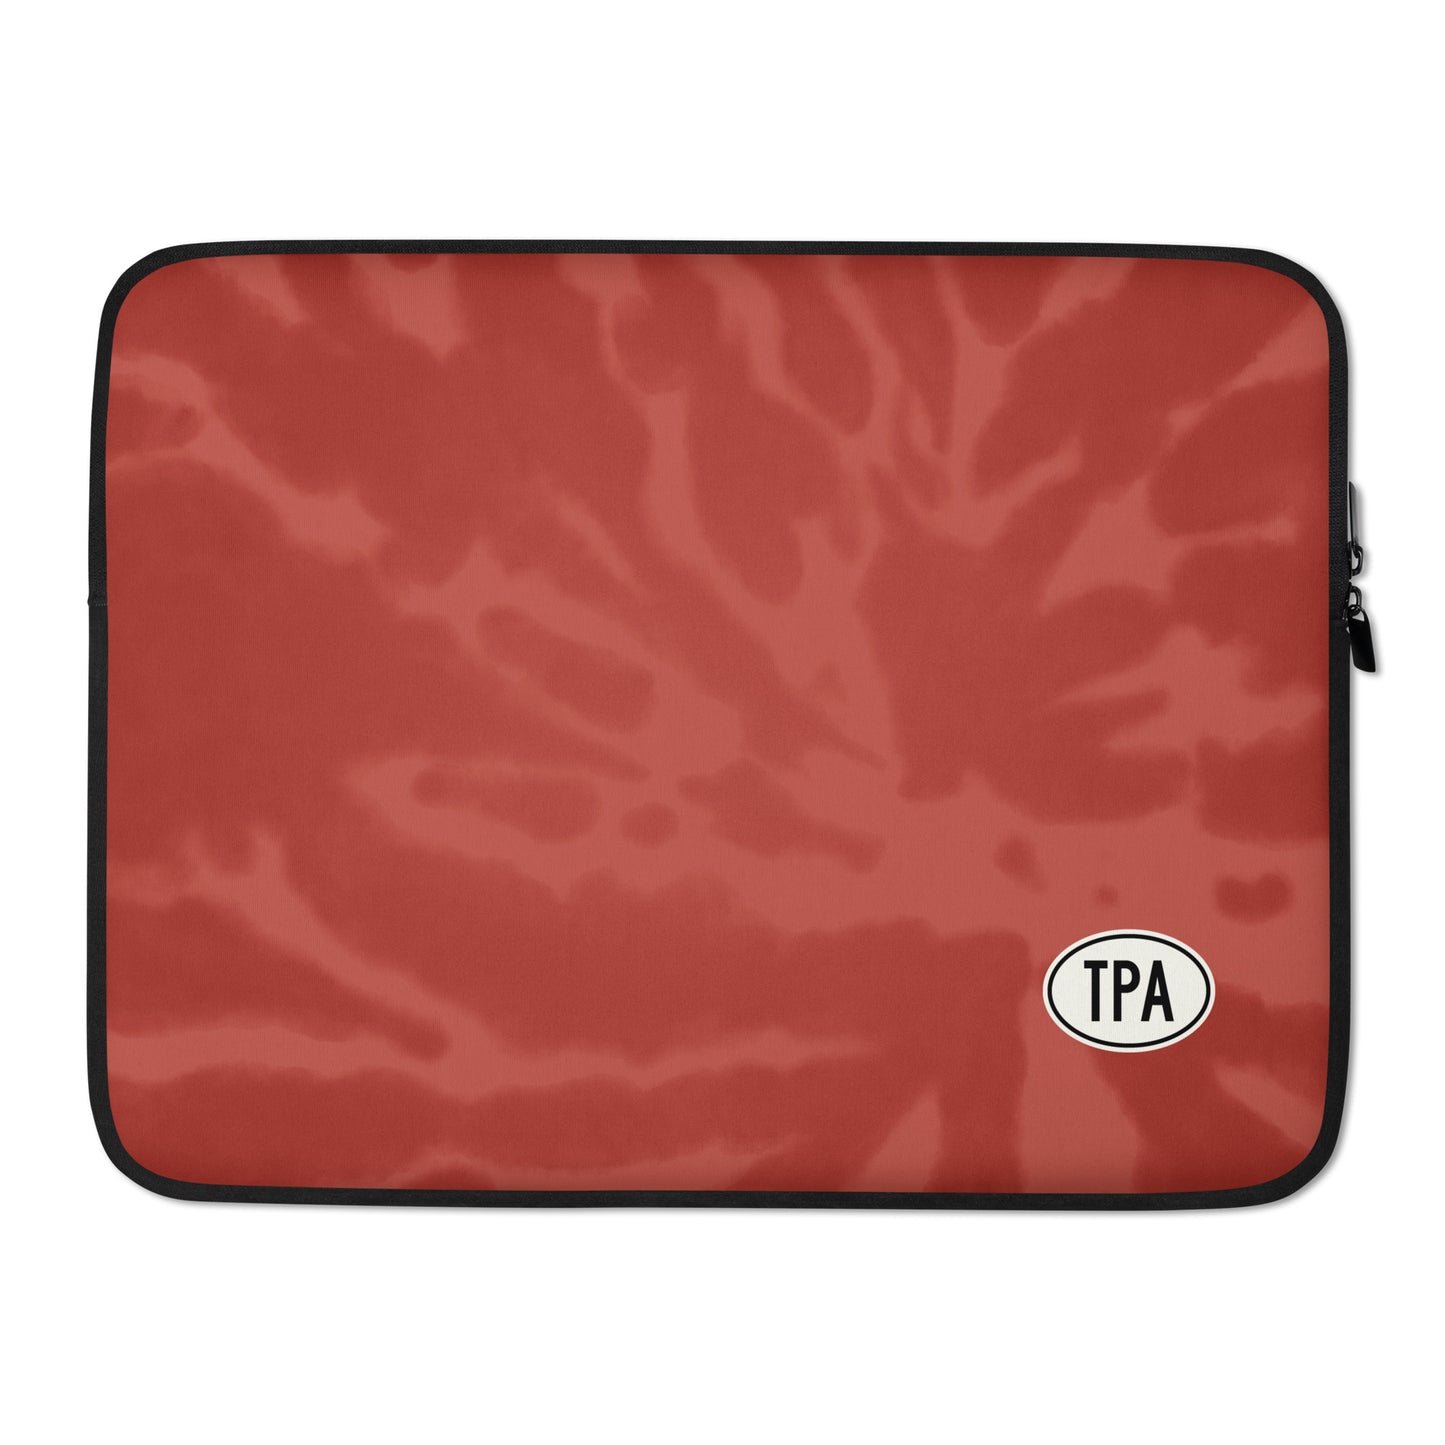 Travel Gift Laptop Sleeve - Red Tie-Dye • TPA Tampa • YHM Designs - Image 02